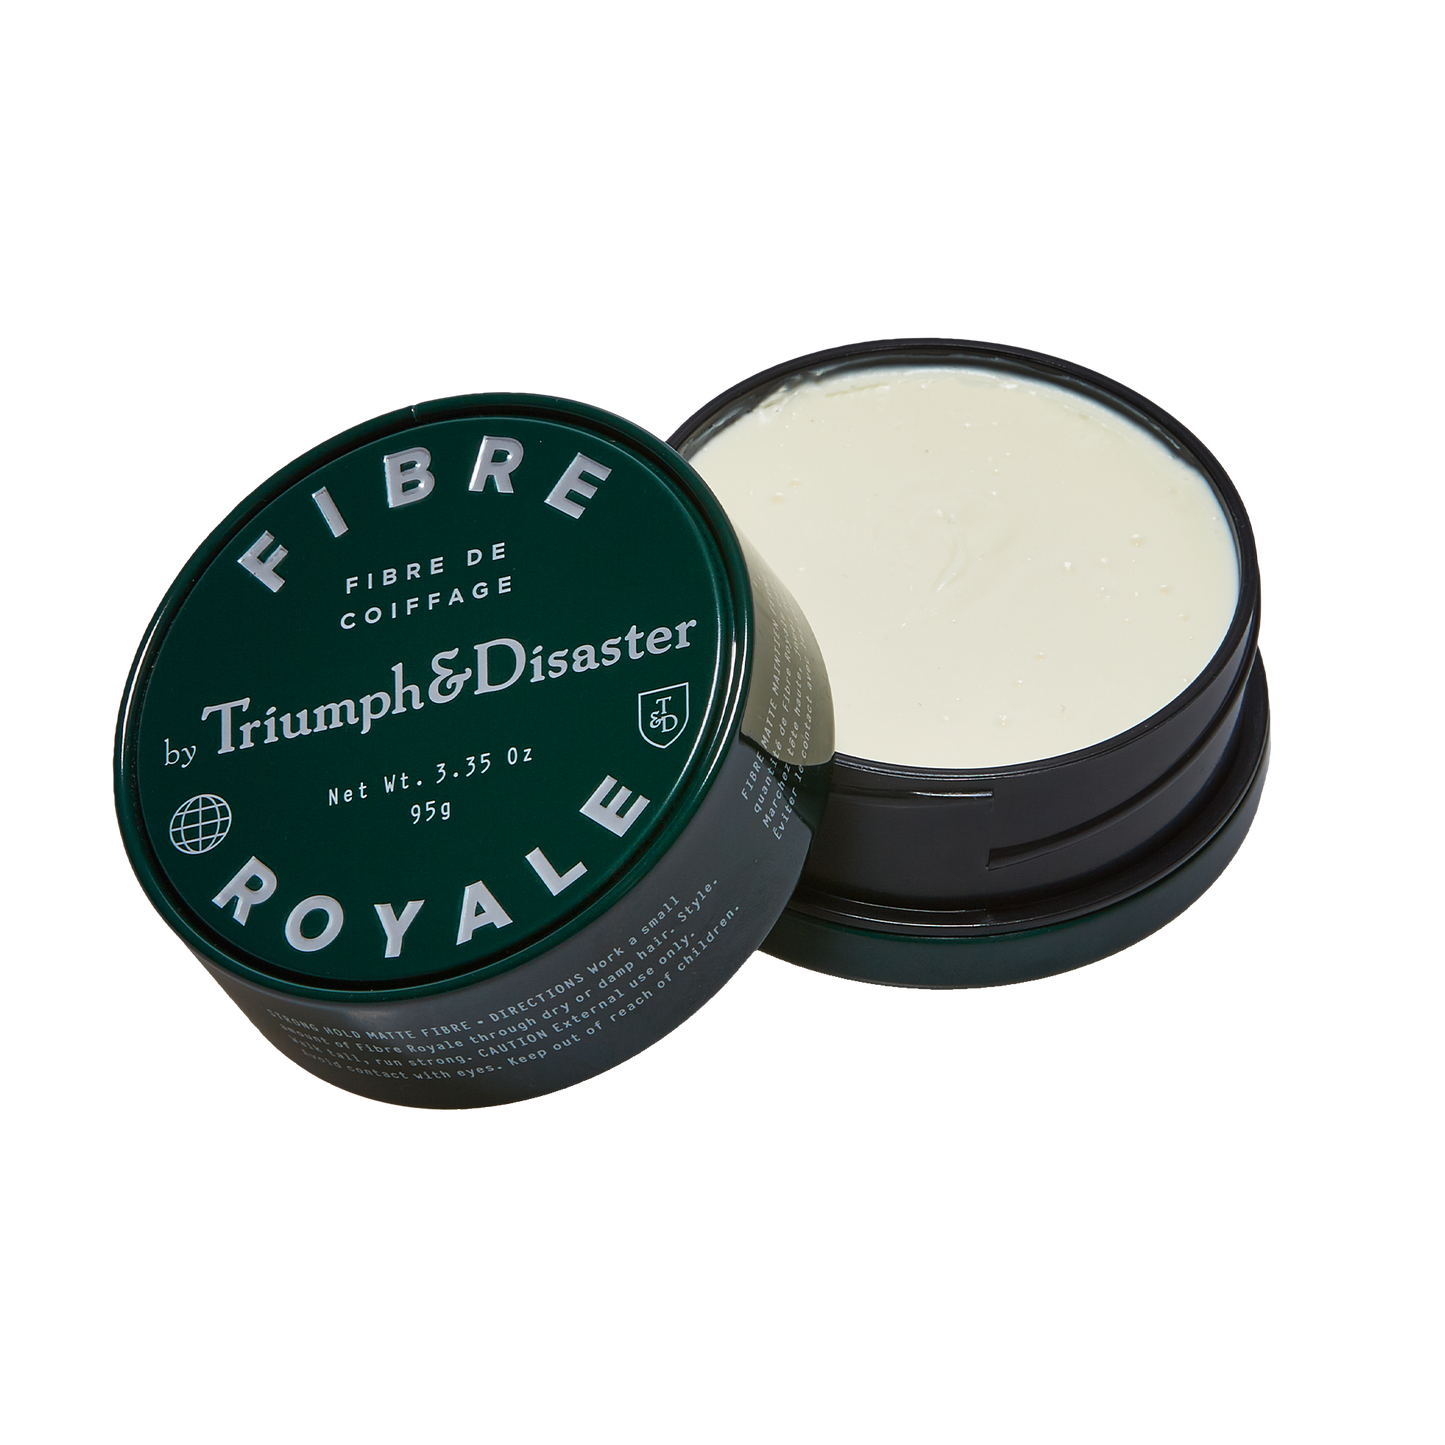 Triumph and Disaster Fibre Royale: Be true to yourself and take the fight to the world, this is Fibre Royale’s DNA. A strong, natural product that provides strength and hold without adding volume or dulling natural shine. Utilising a bespoke blend of Beeswax, Argan oil and Kawakawa to mould hair and treat the scalp, Fibre Royale is a strong hold, low volume product that delivers a natural look & style. Perfect for medium to long hairstyles, ideal for men’s cuts, best for thicker hair types.